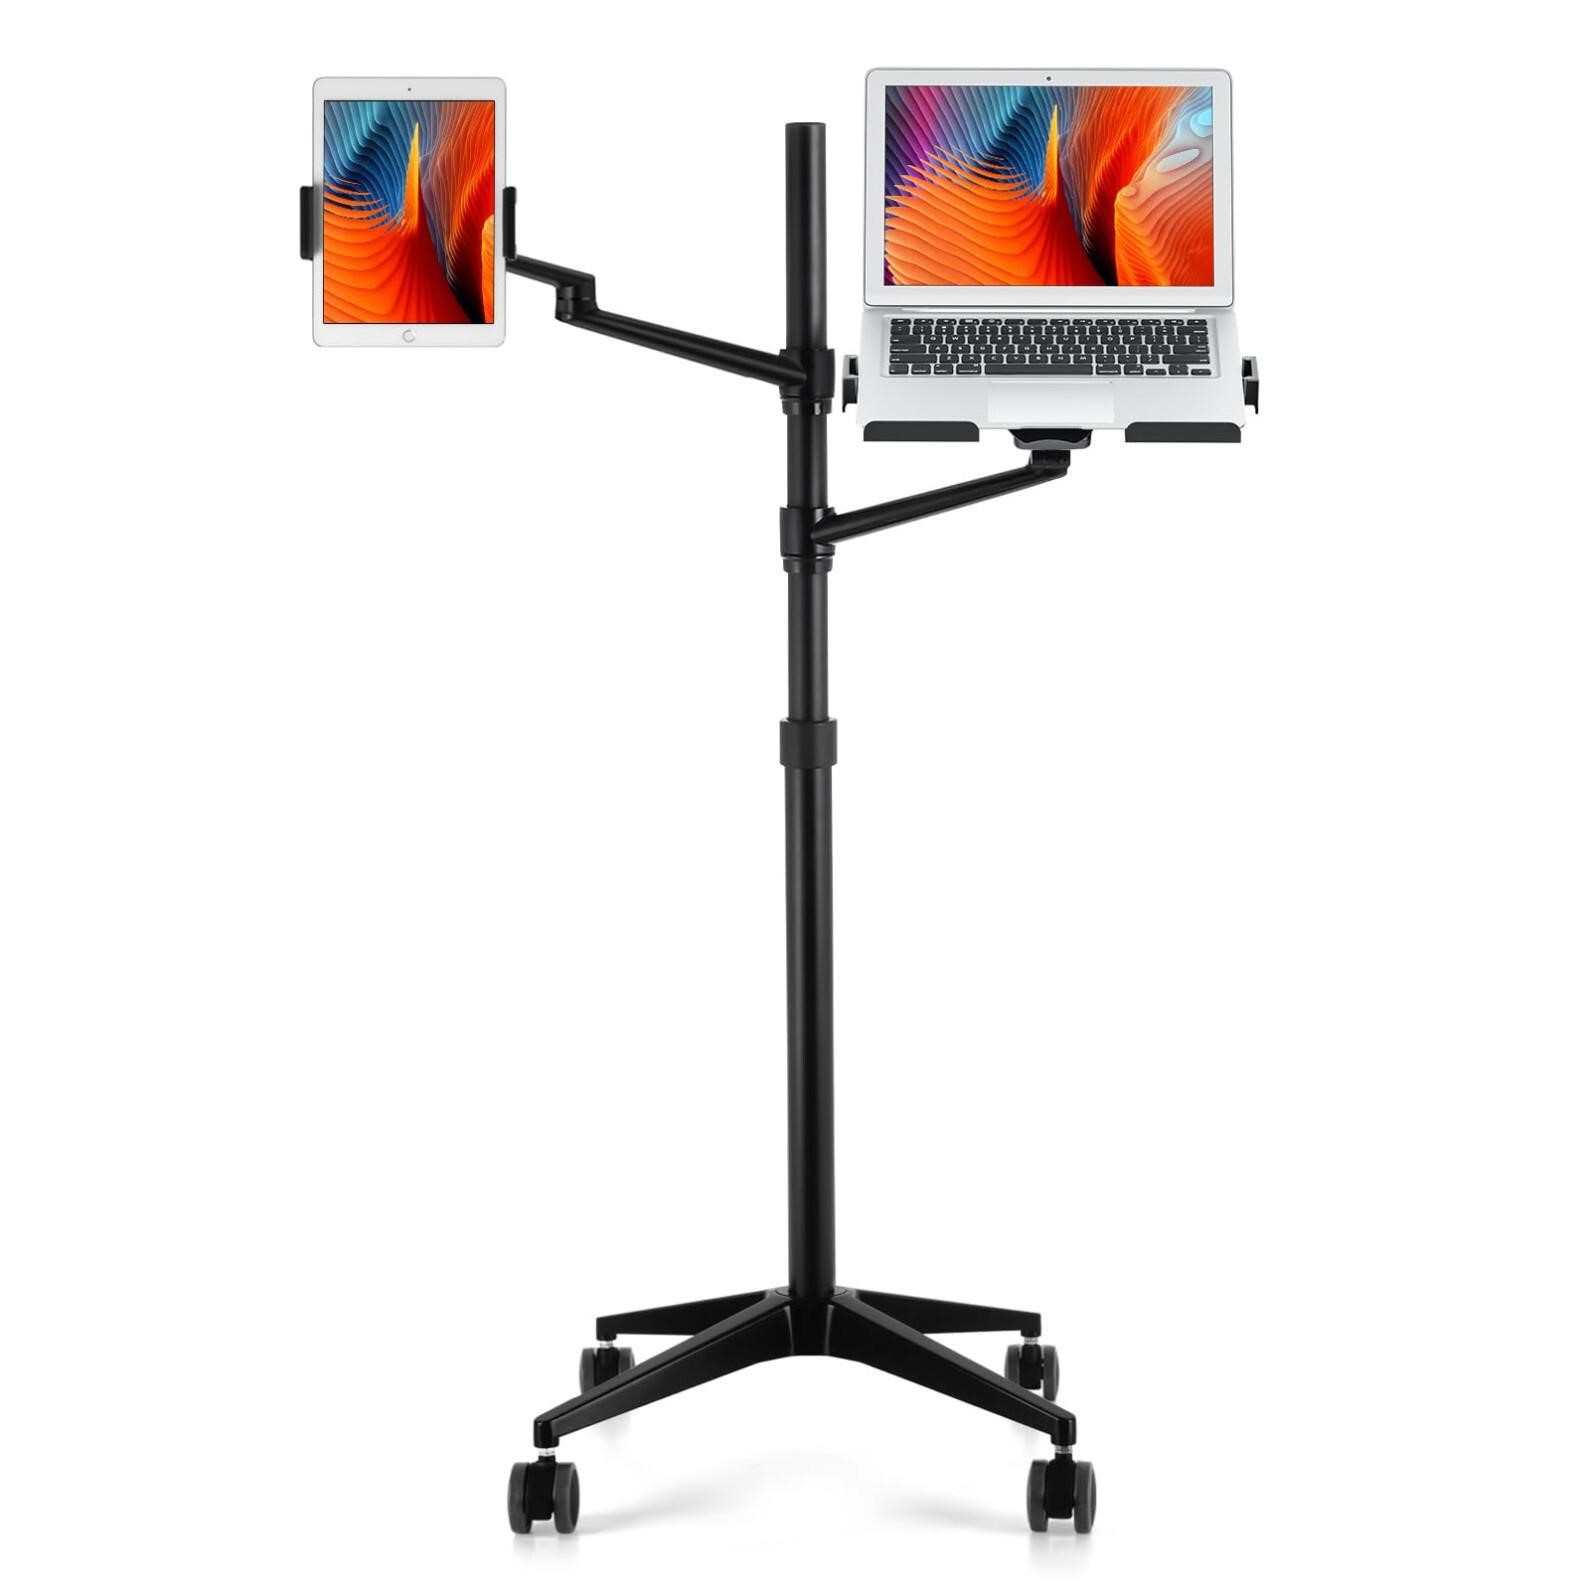 viozon Tablet and Laptop Floor Stand, 2-in-1 Rolli